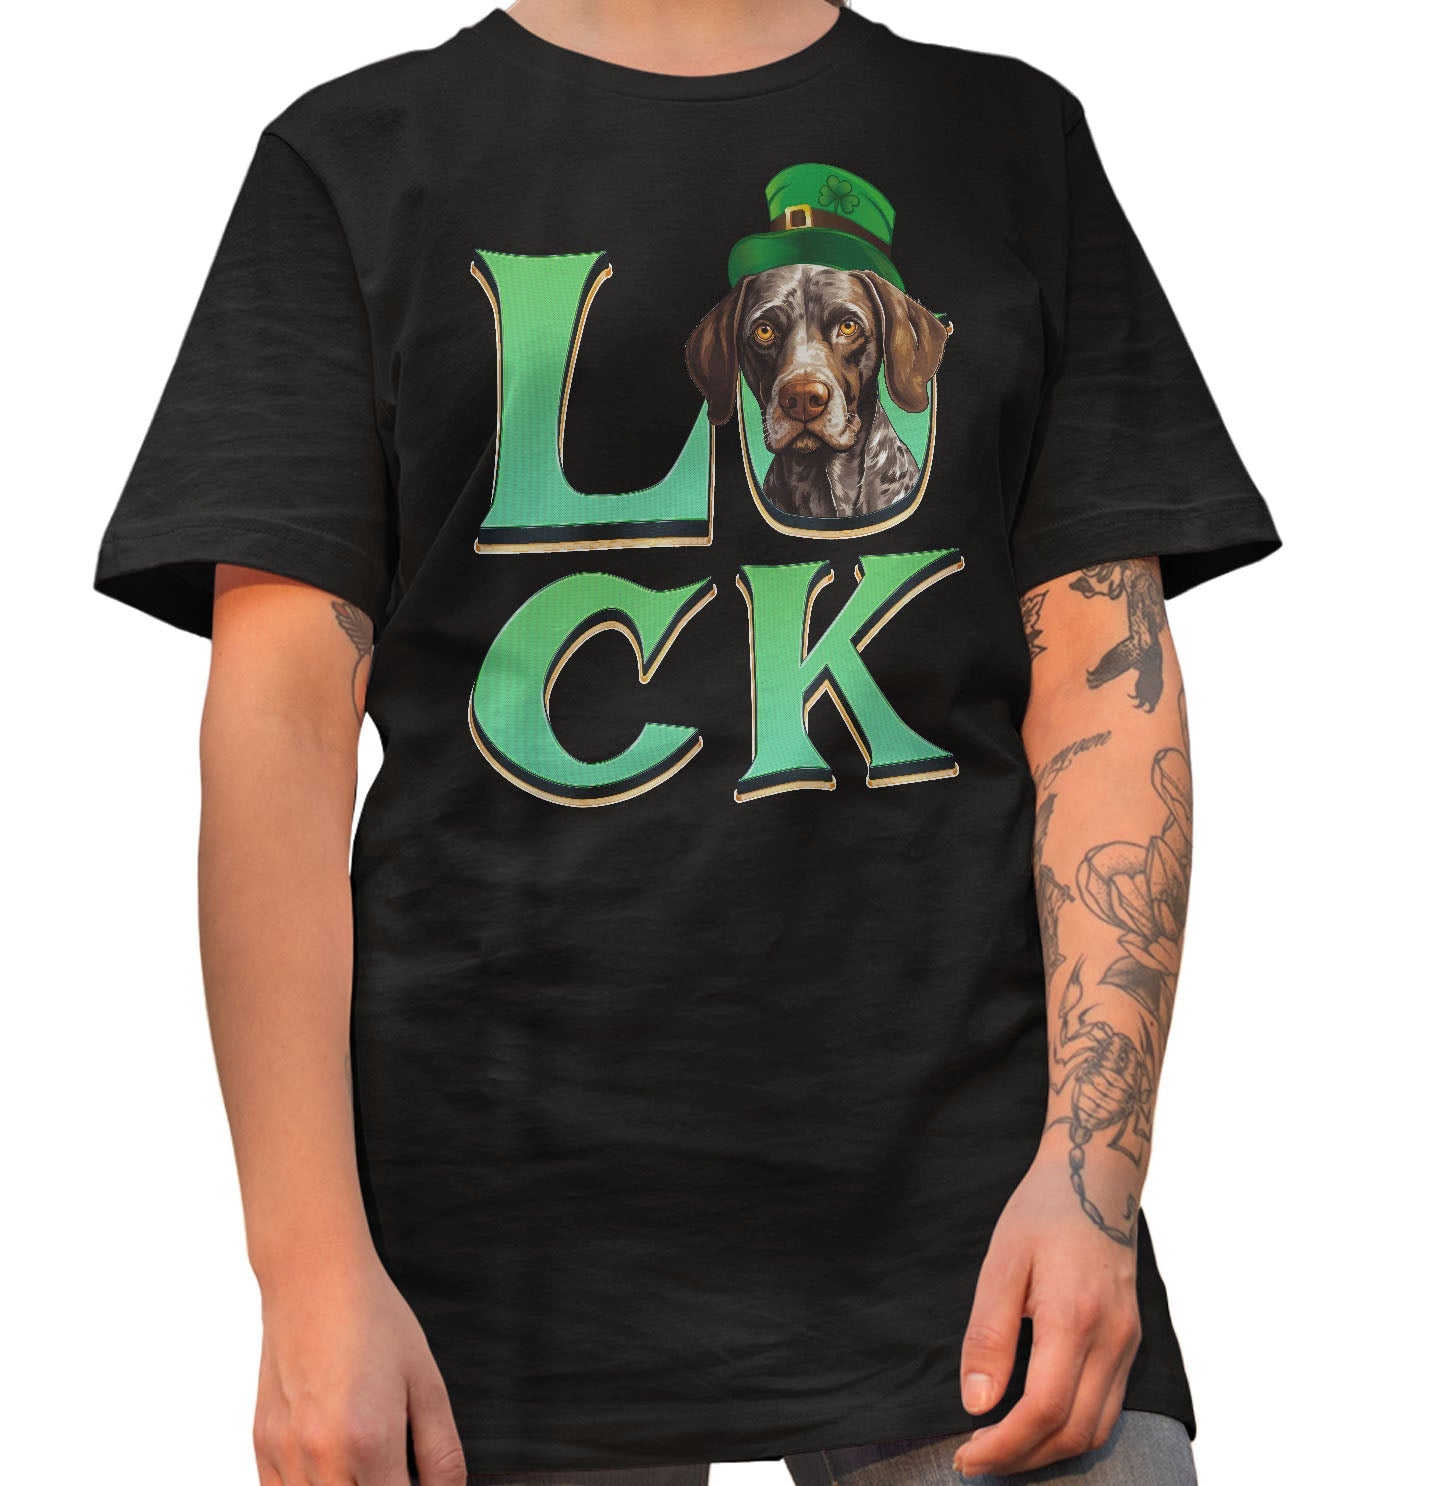 Big LUCK St. Patrick's Day German Shorthaired Pointer - Adult Unisex T-Shirt